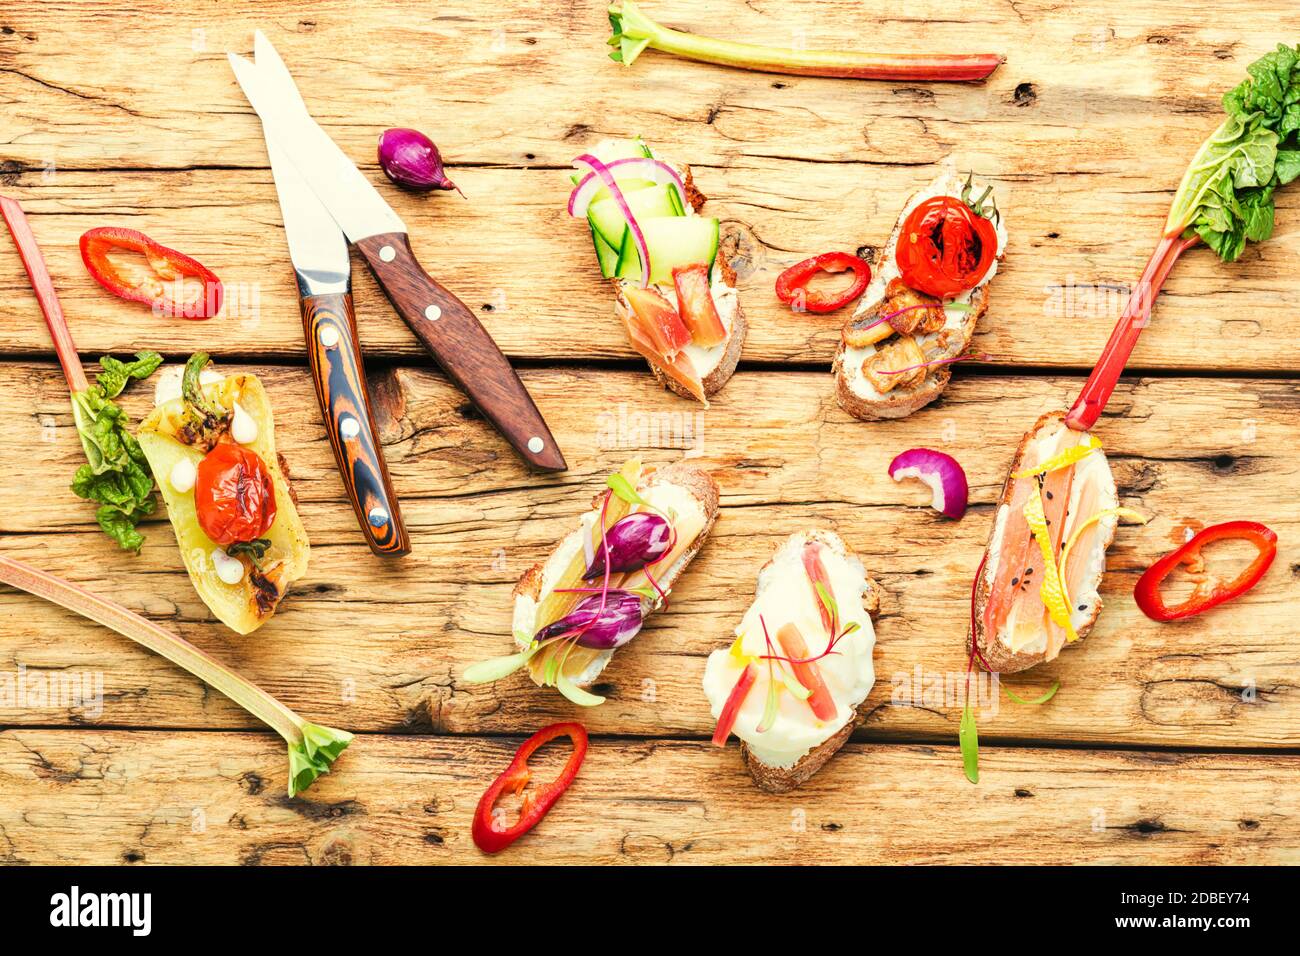 Tasty italian bruschetta with vegetables and ingredients.Assorted different bruschetta on a wooden table Stock Photo